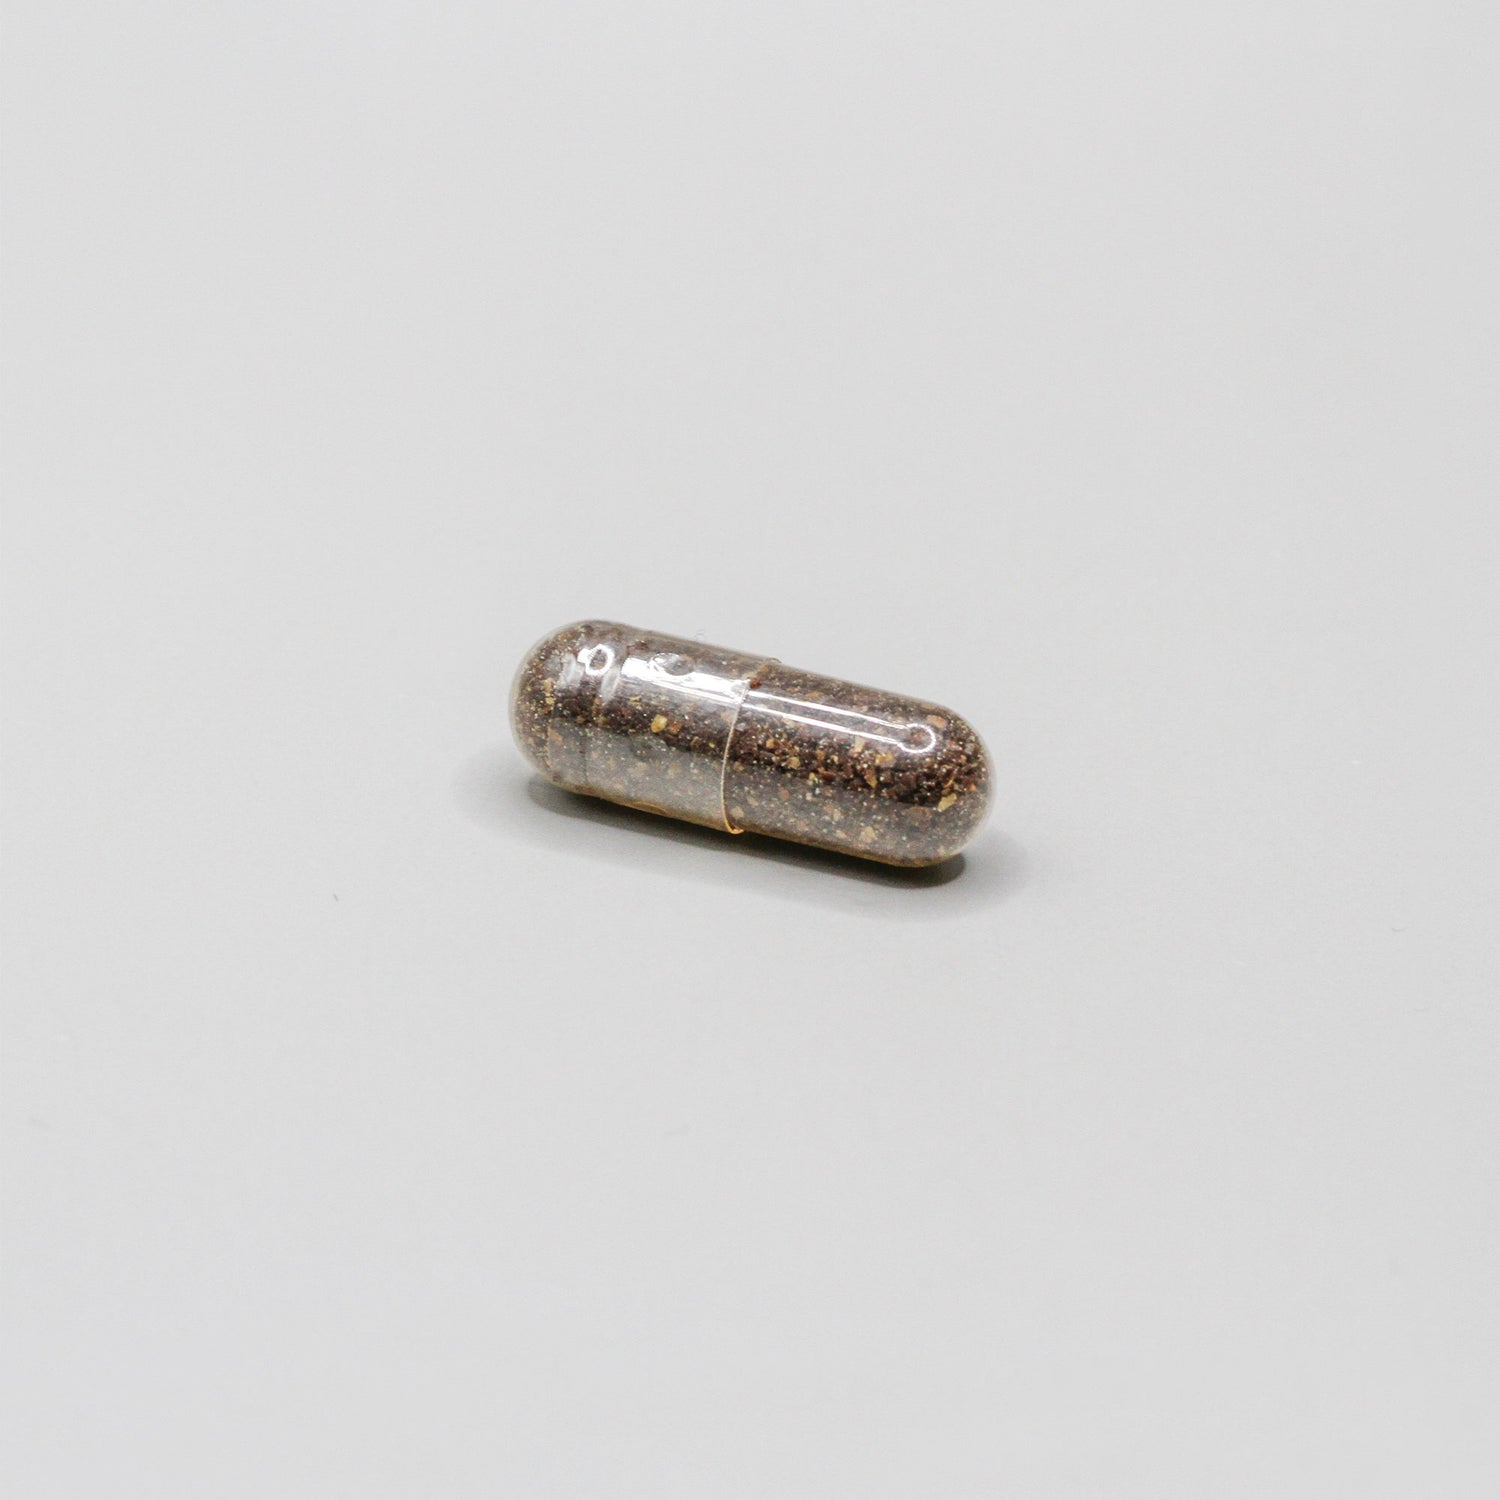 Pill filled with small brown pieces